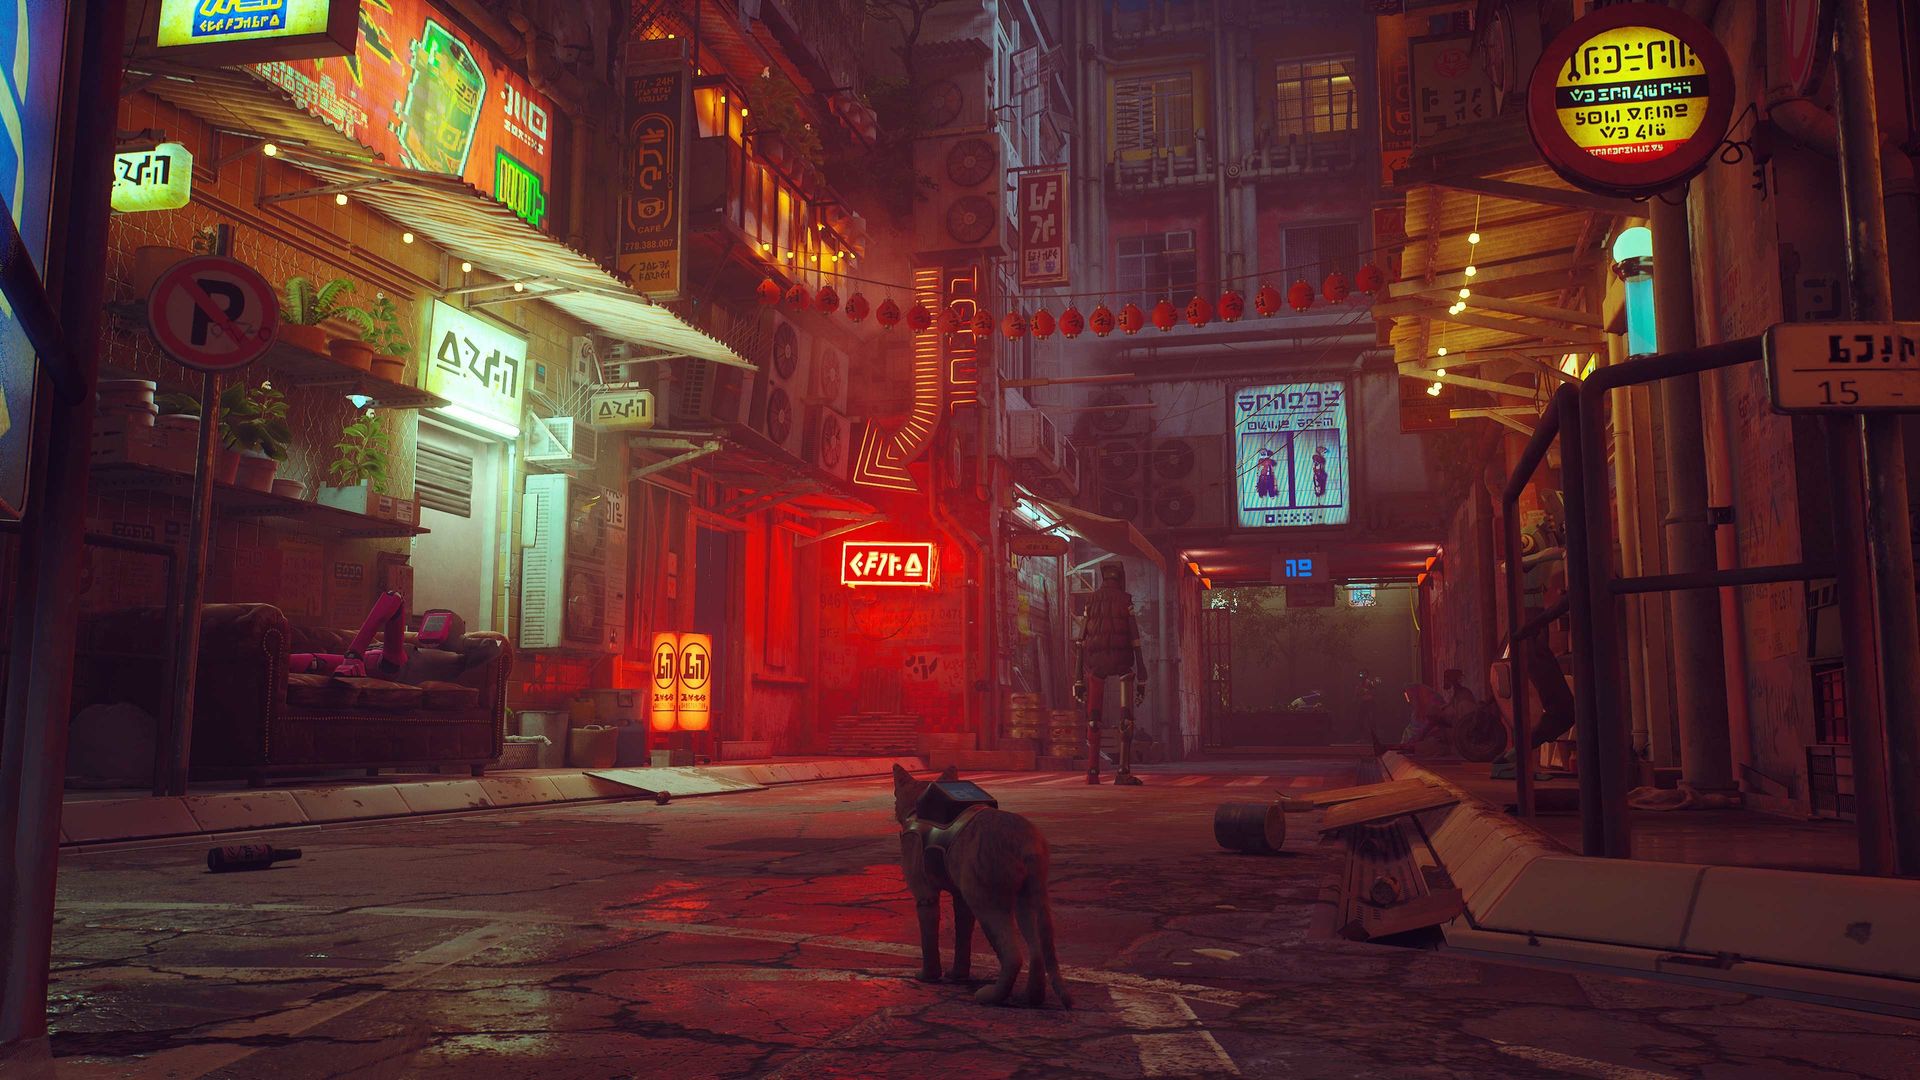 Video game screenshot of a cat walking through a rainy street in a Japanese city at night